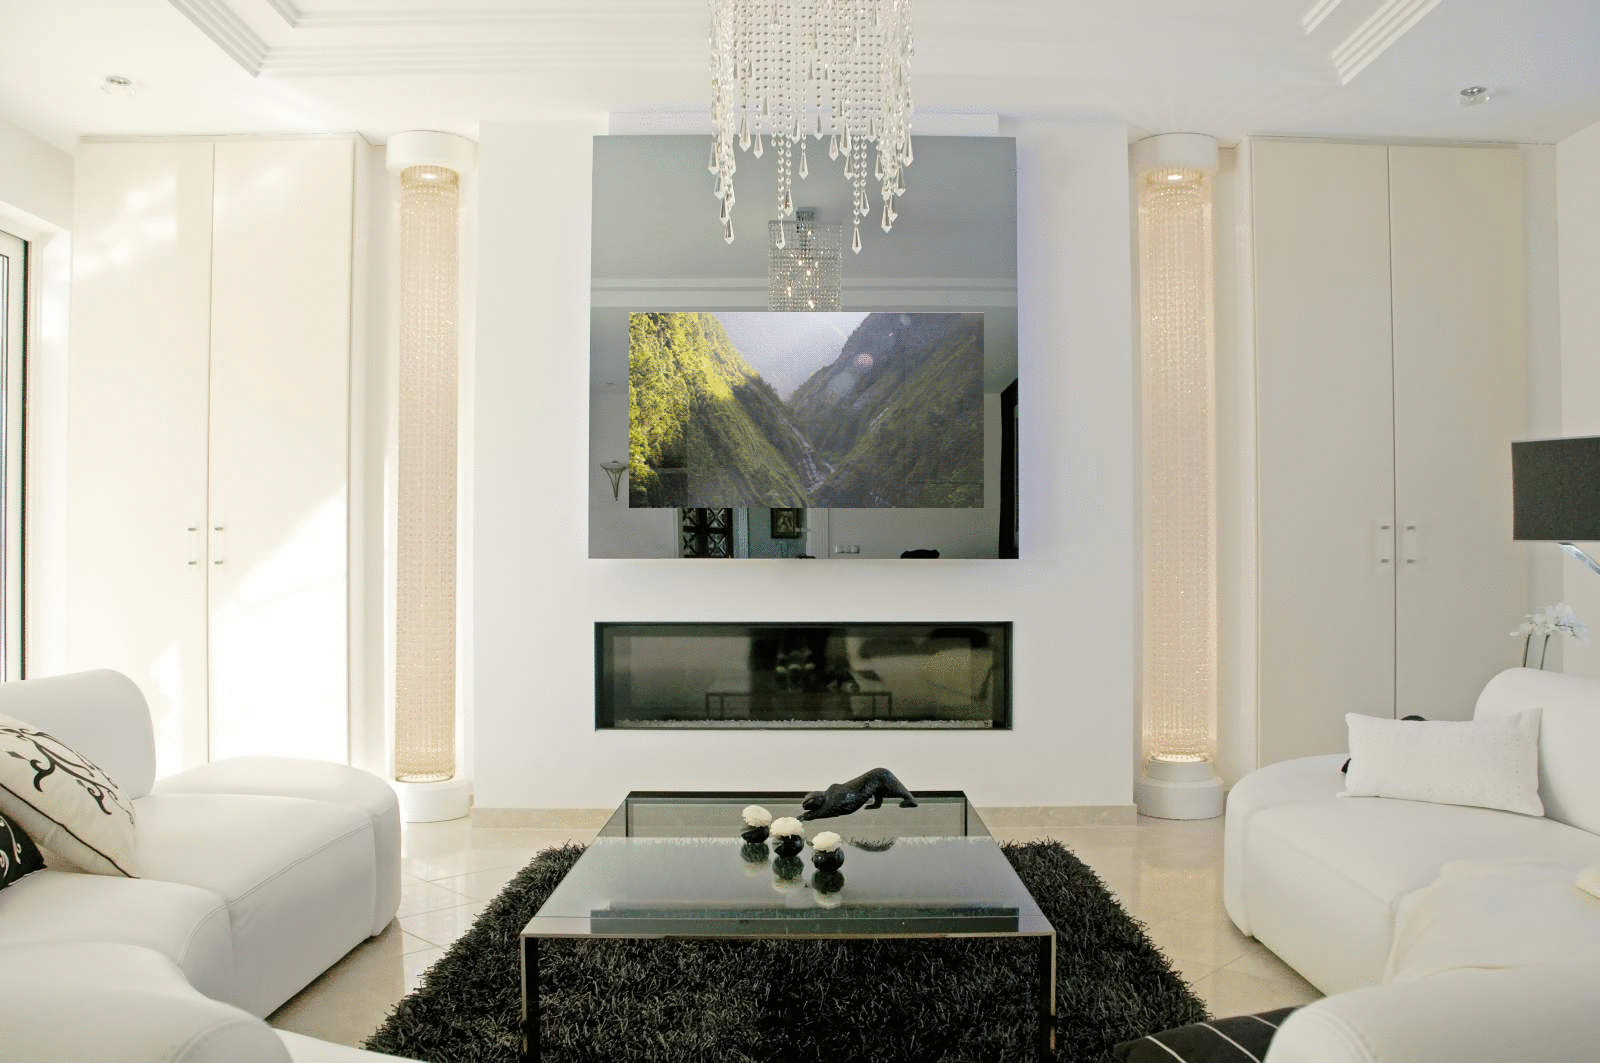 Built In Wall Xander Prestige, Large Mirror With Built In Tv